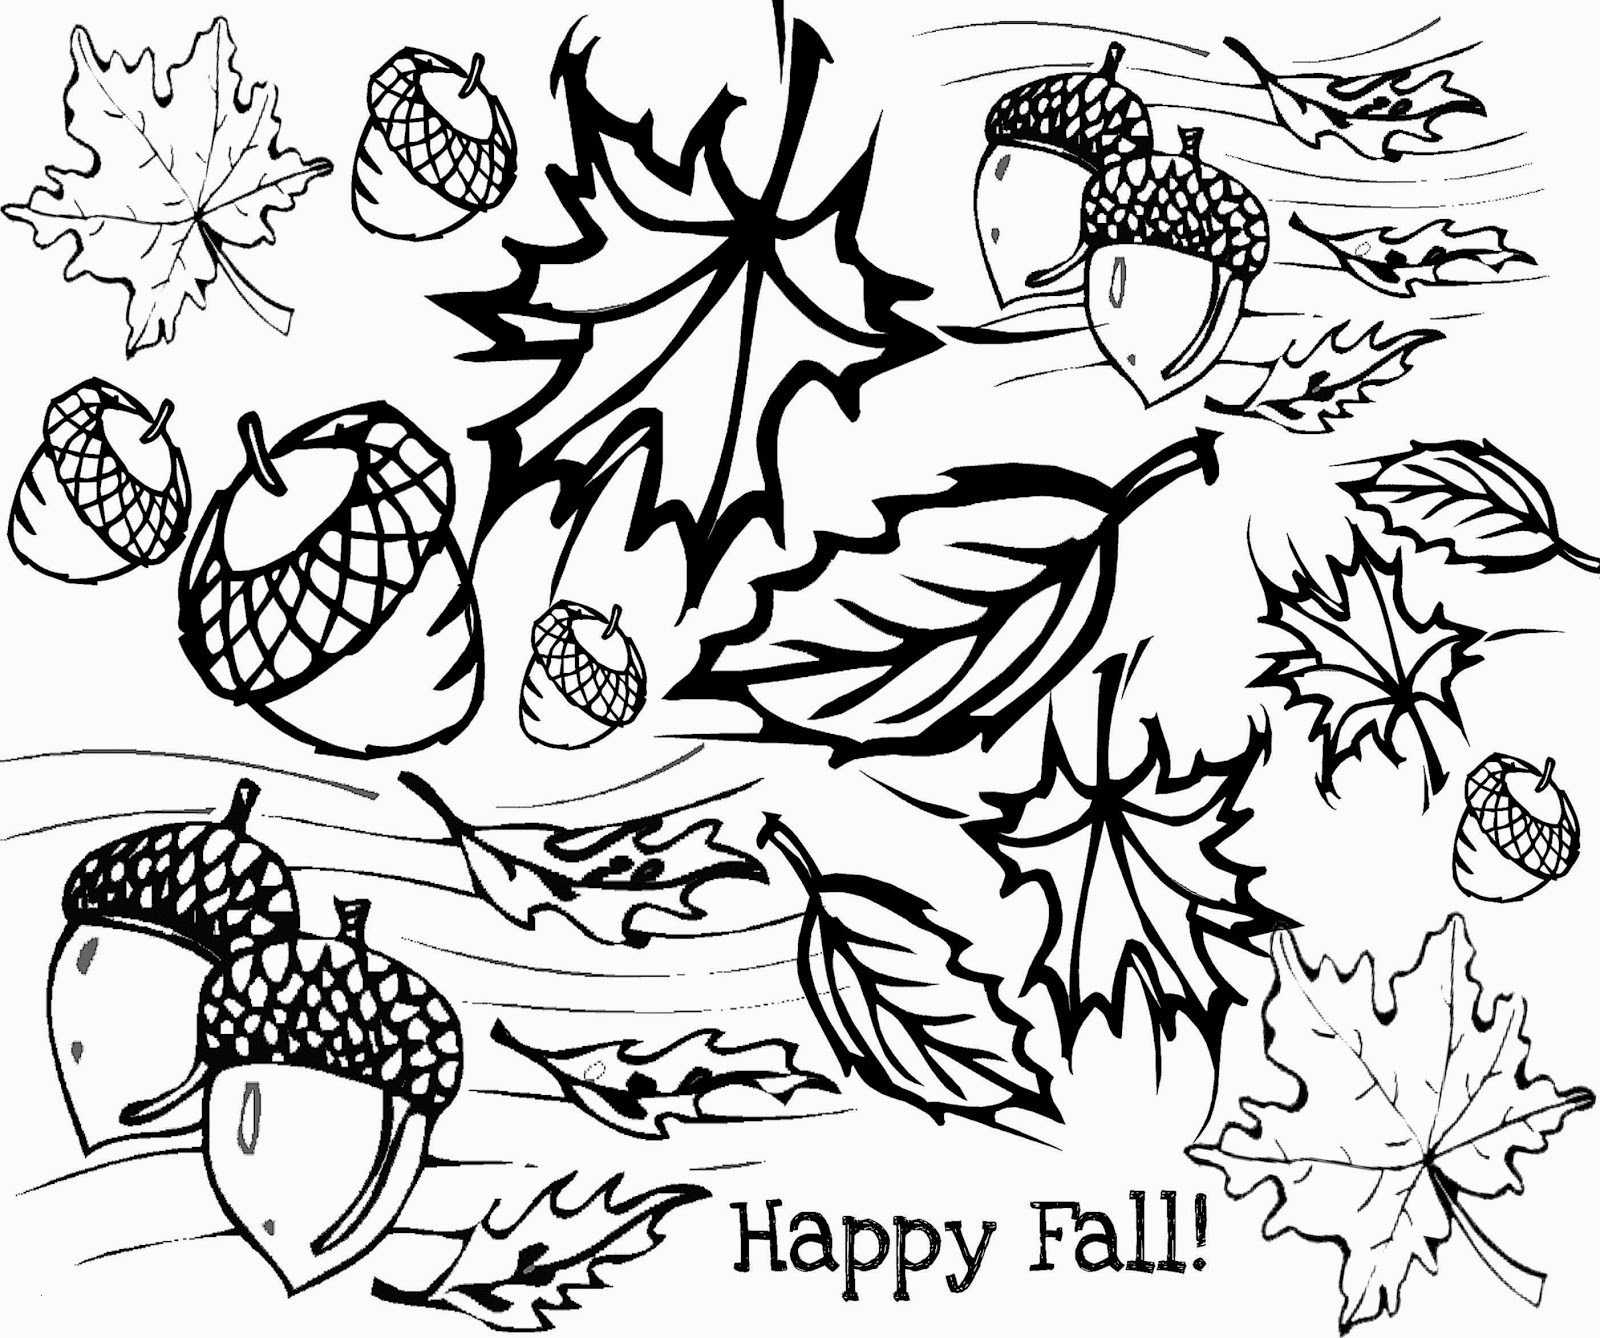 https://www.bestcoloringpagesforkids.com/wp-content/uploads/2016/08/Happy-Fall-Printable-to-Color.jpg